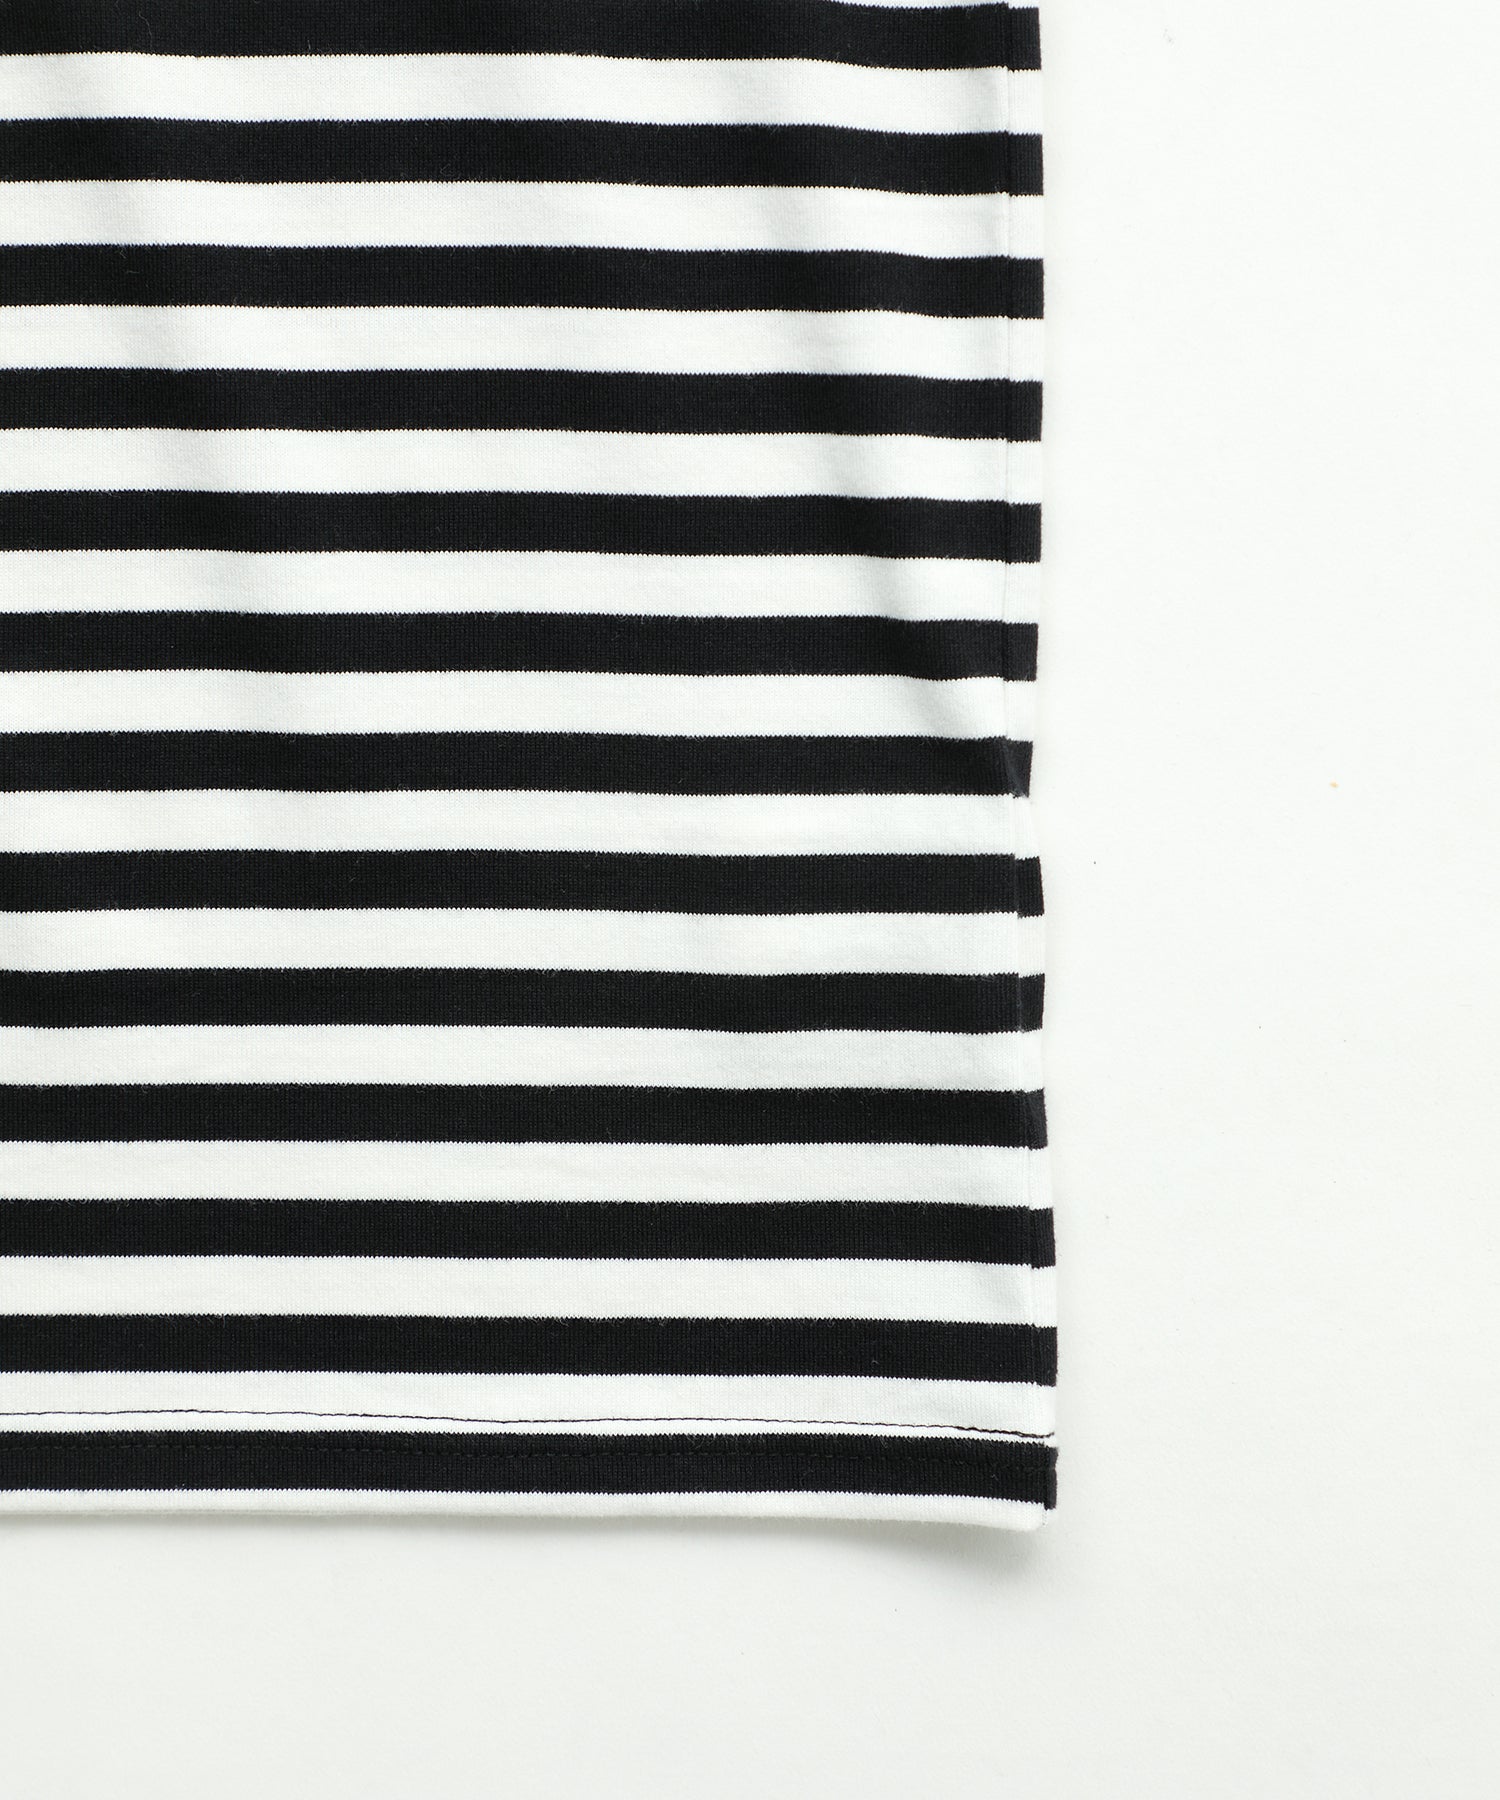 STRIPED RELAX S/S TEE, C&S, X-Girl  